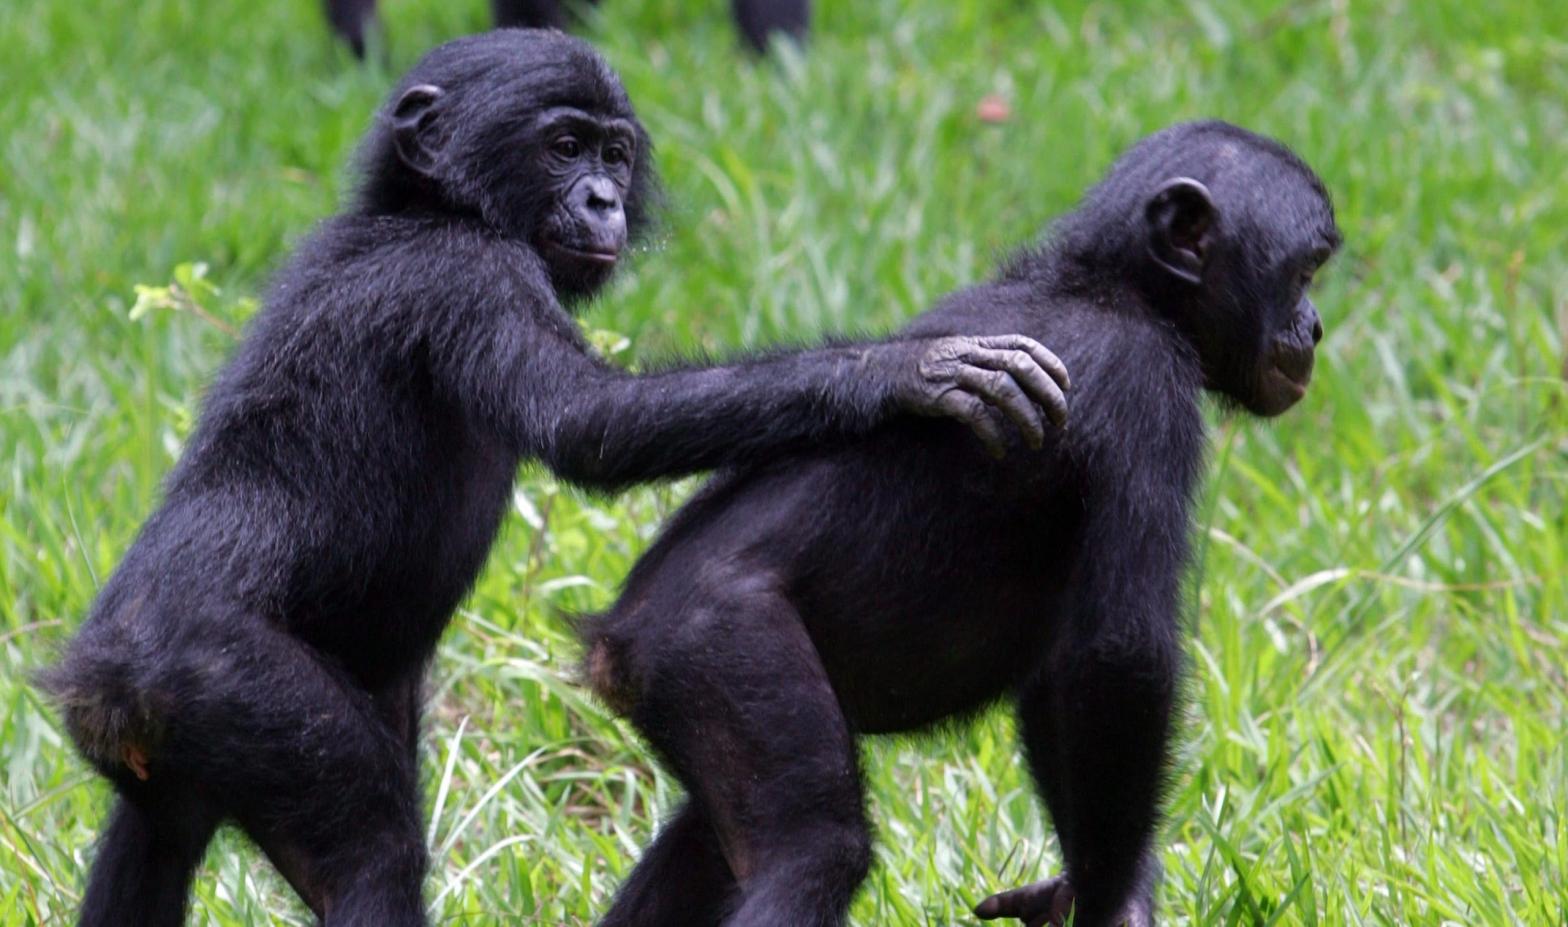 A pair of bonobos playing together in Kinshasa in 2006. (Photo: ISSOUF SANOGO/AFP, Getty Images)